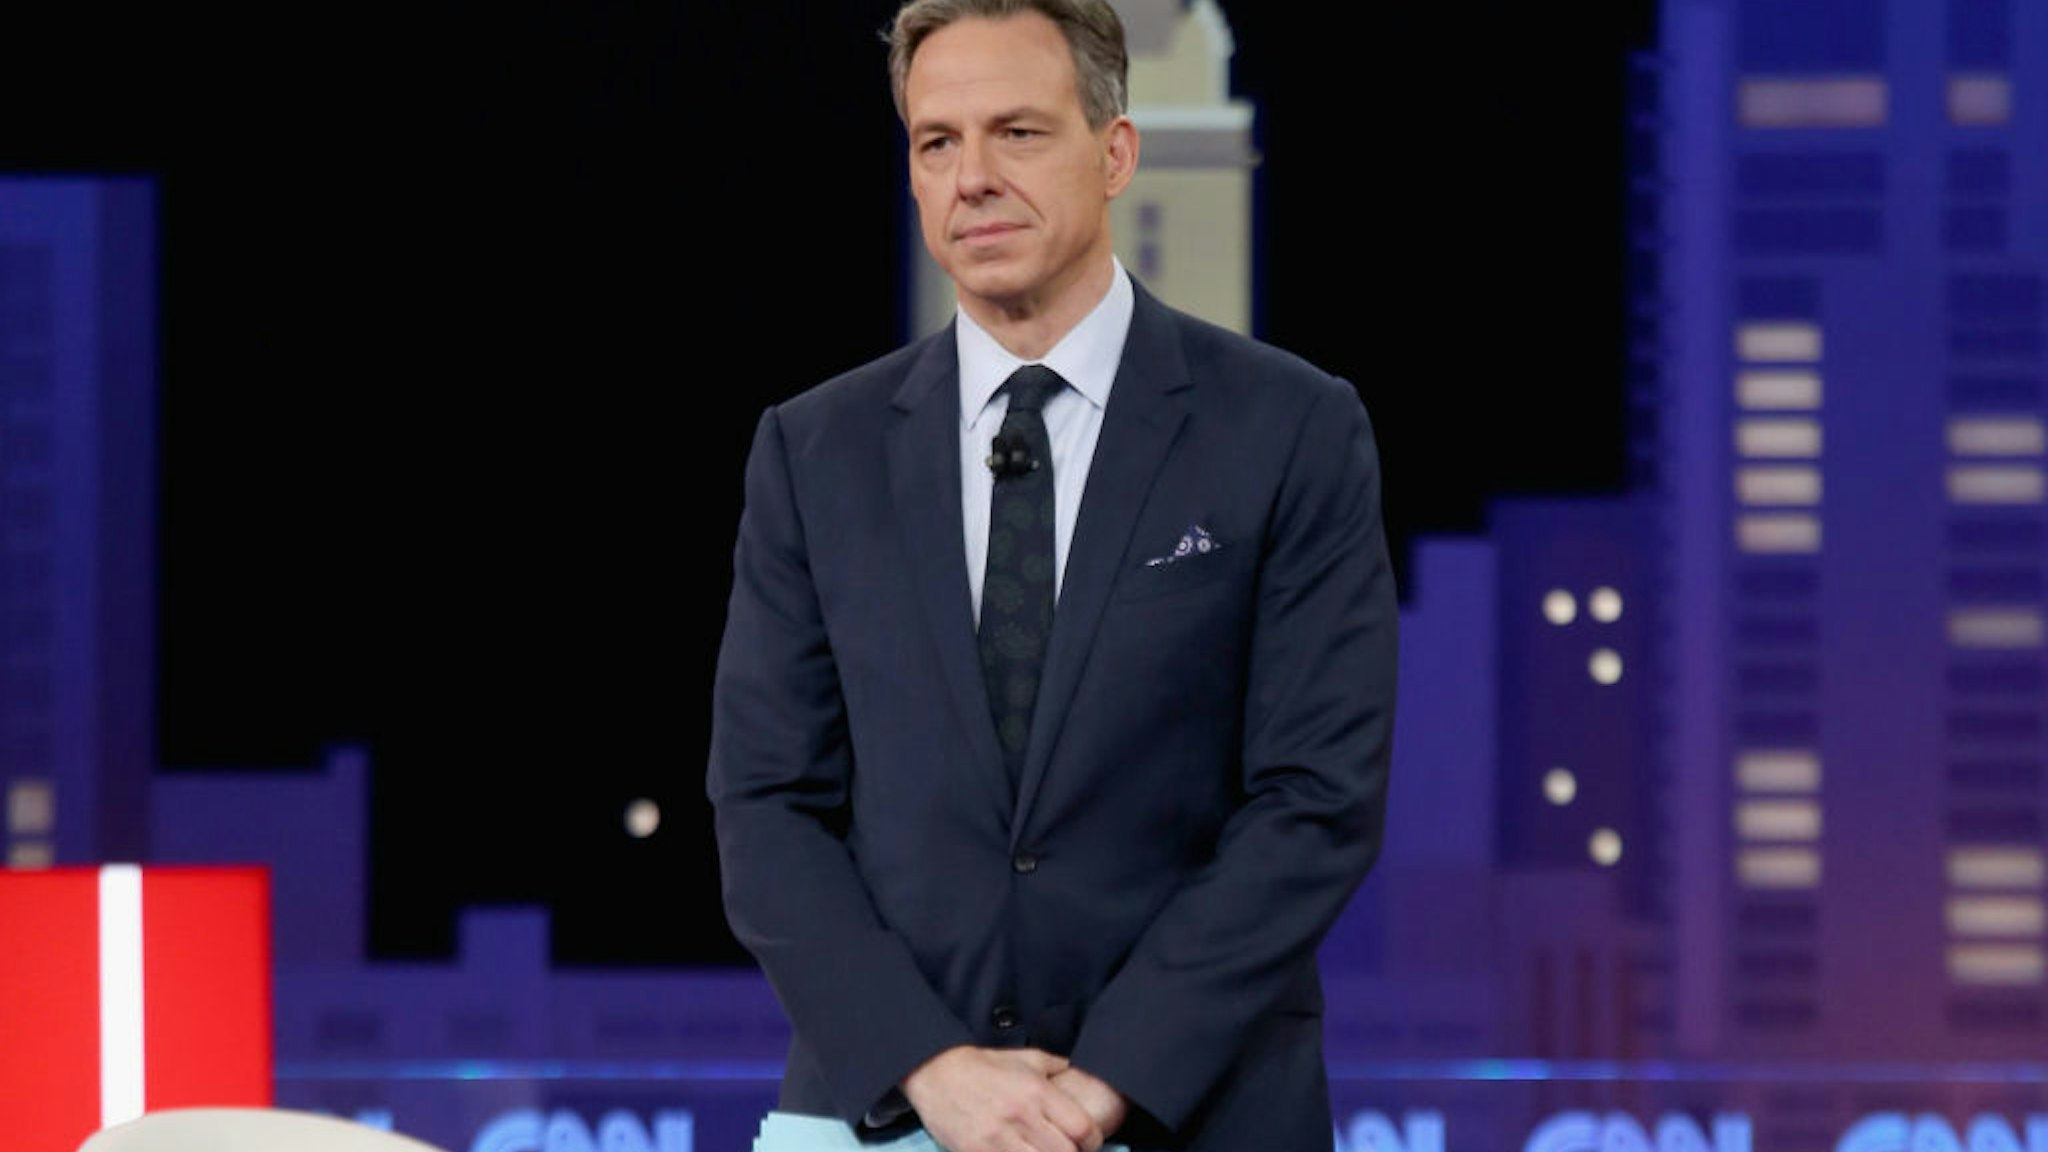 AUSTIN, TEXAS - MARCH 10: Jake Tapper speaks during the 'CNN Democratic Town Hall' at ACL Live at The Moody Theater during the 2019 SXSW Conference And Festival on March 10, 2019 in Austin, Texas. (Photo by Gary Miller/FilmMagic)